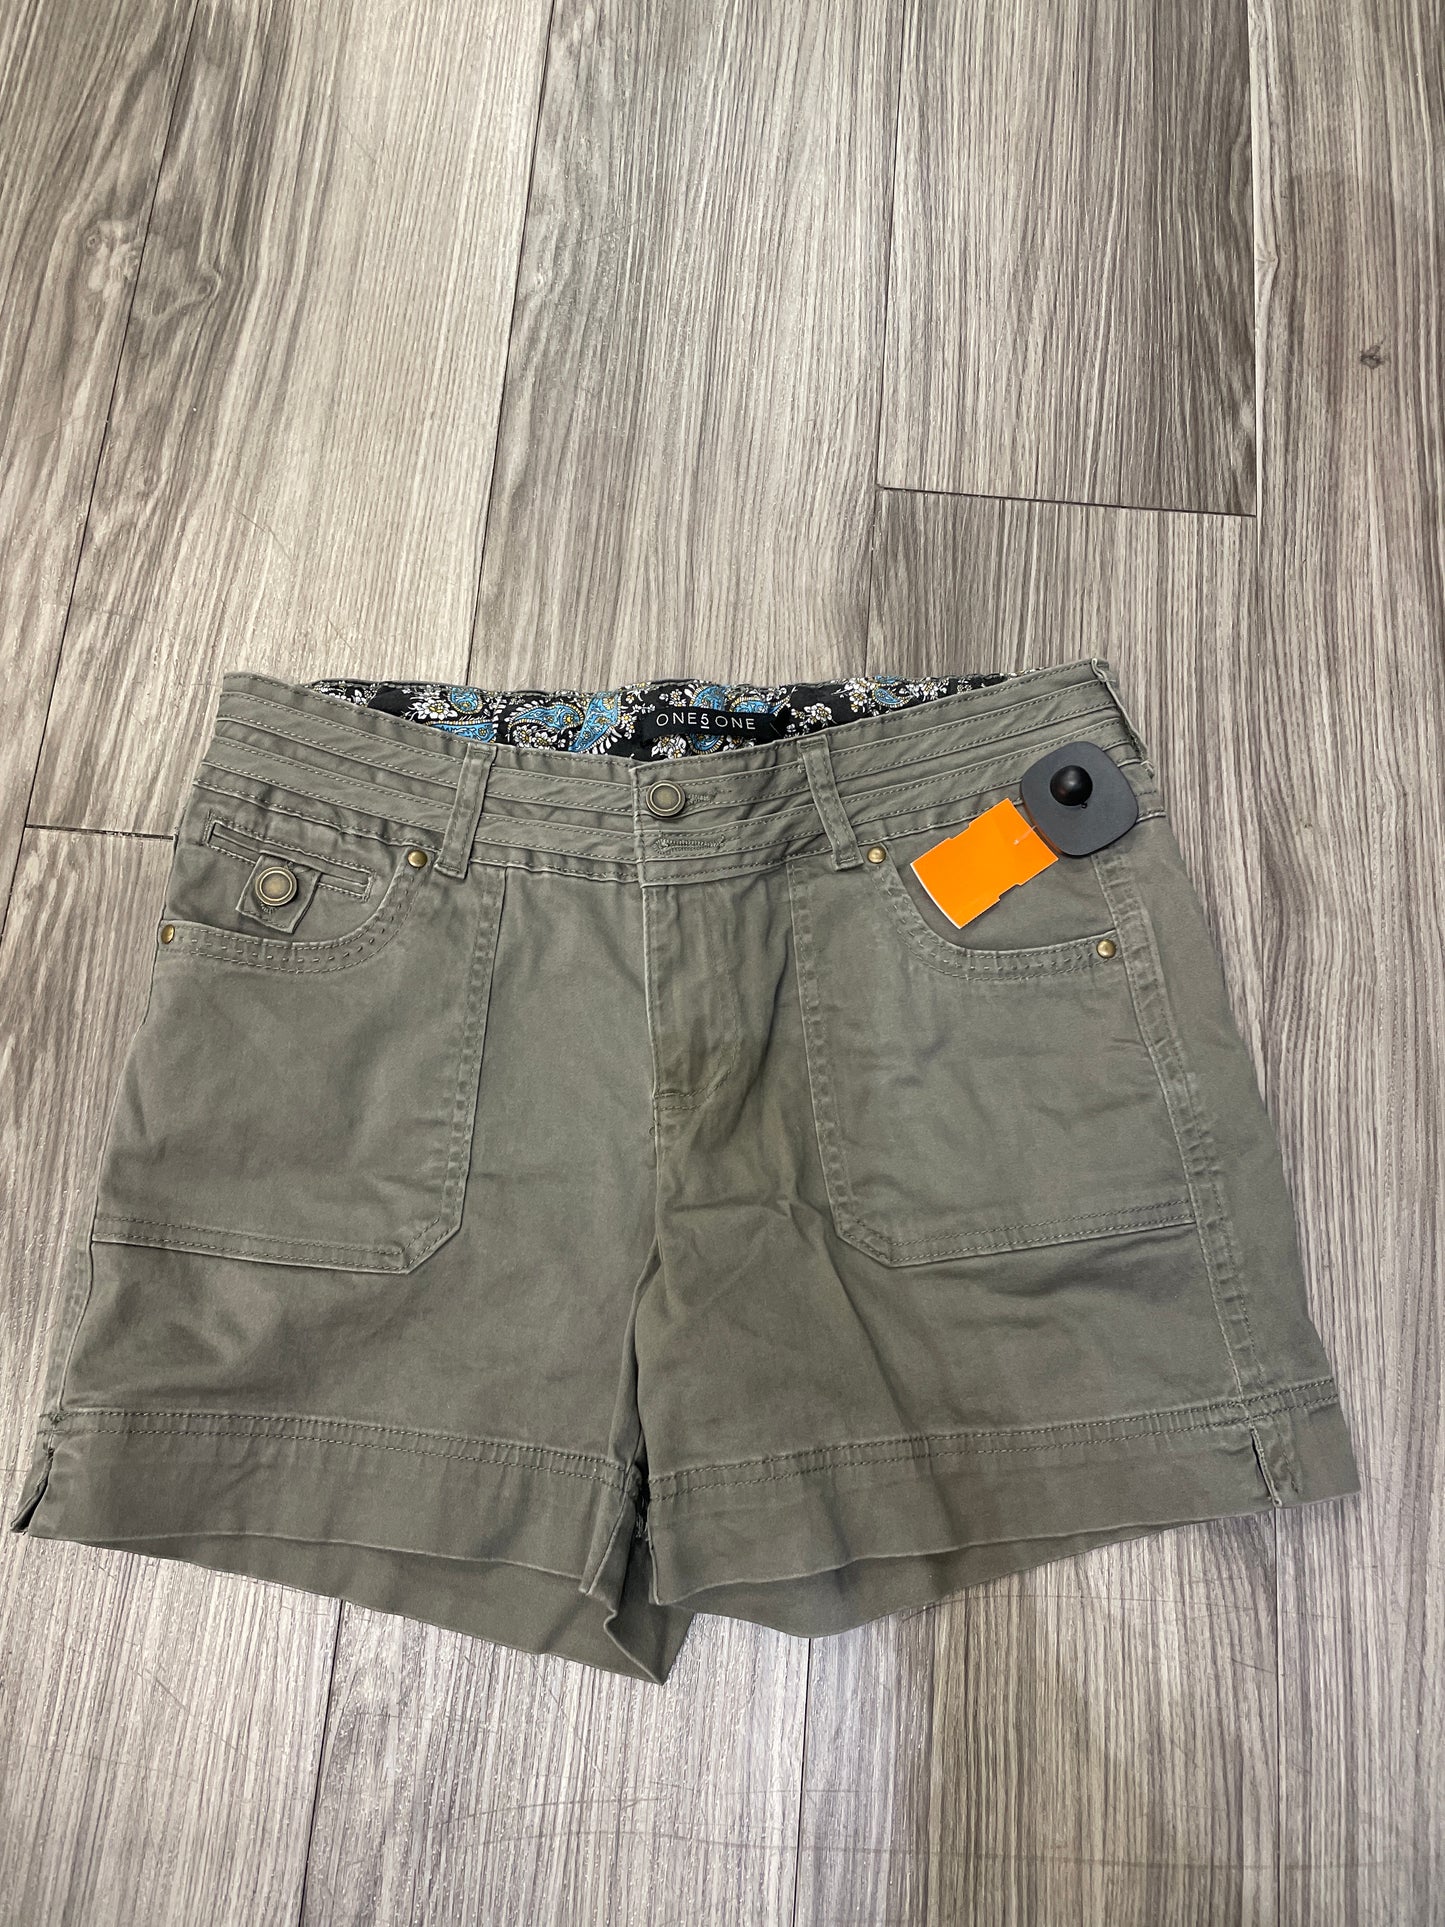 Shorts By One 5 One  Size: 8